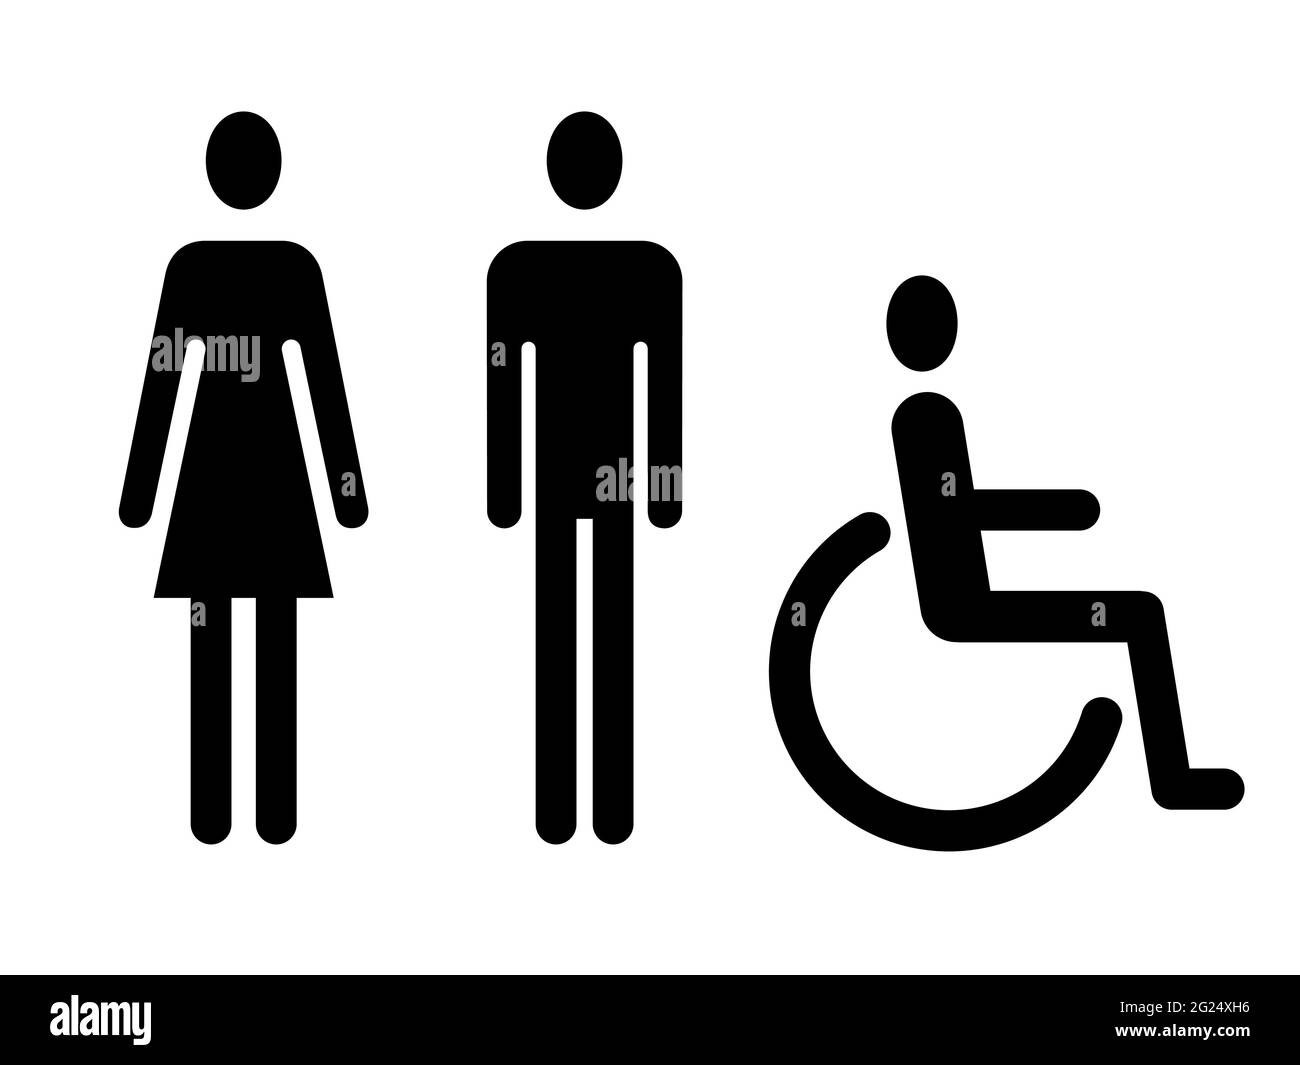 Man, woman and wheelchair toilet icons. Flat vector symbols isolated on white background, EPS 8. Stock Vector